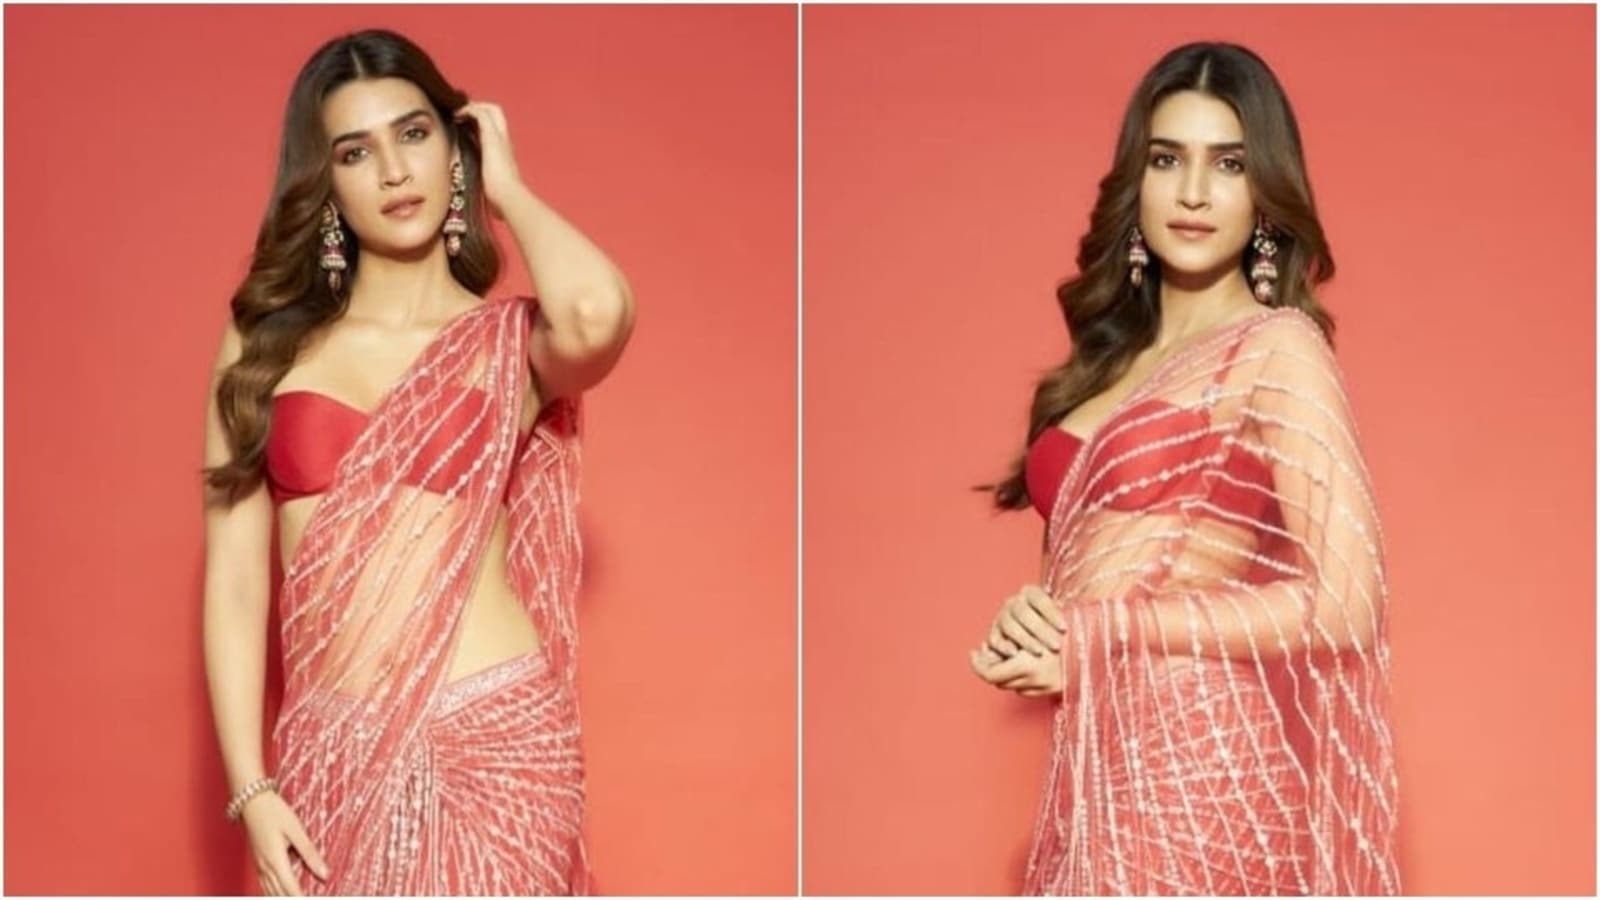 Kriti Sanon In Sheer Sequin Saree Makes A Case For Pairing Six Yards With A Modern Statement